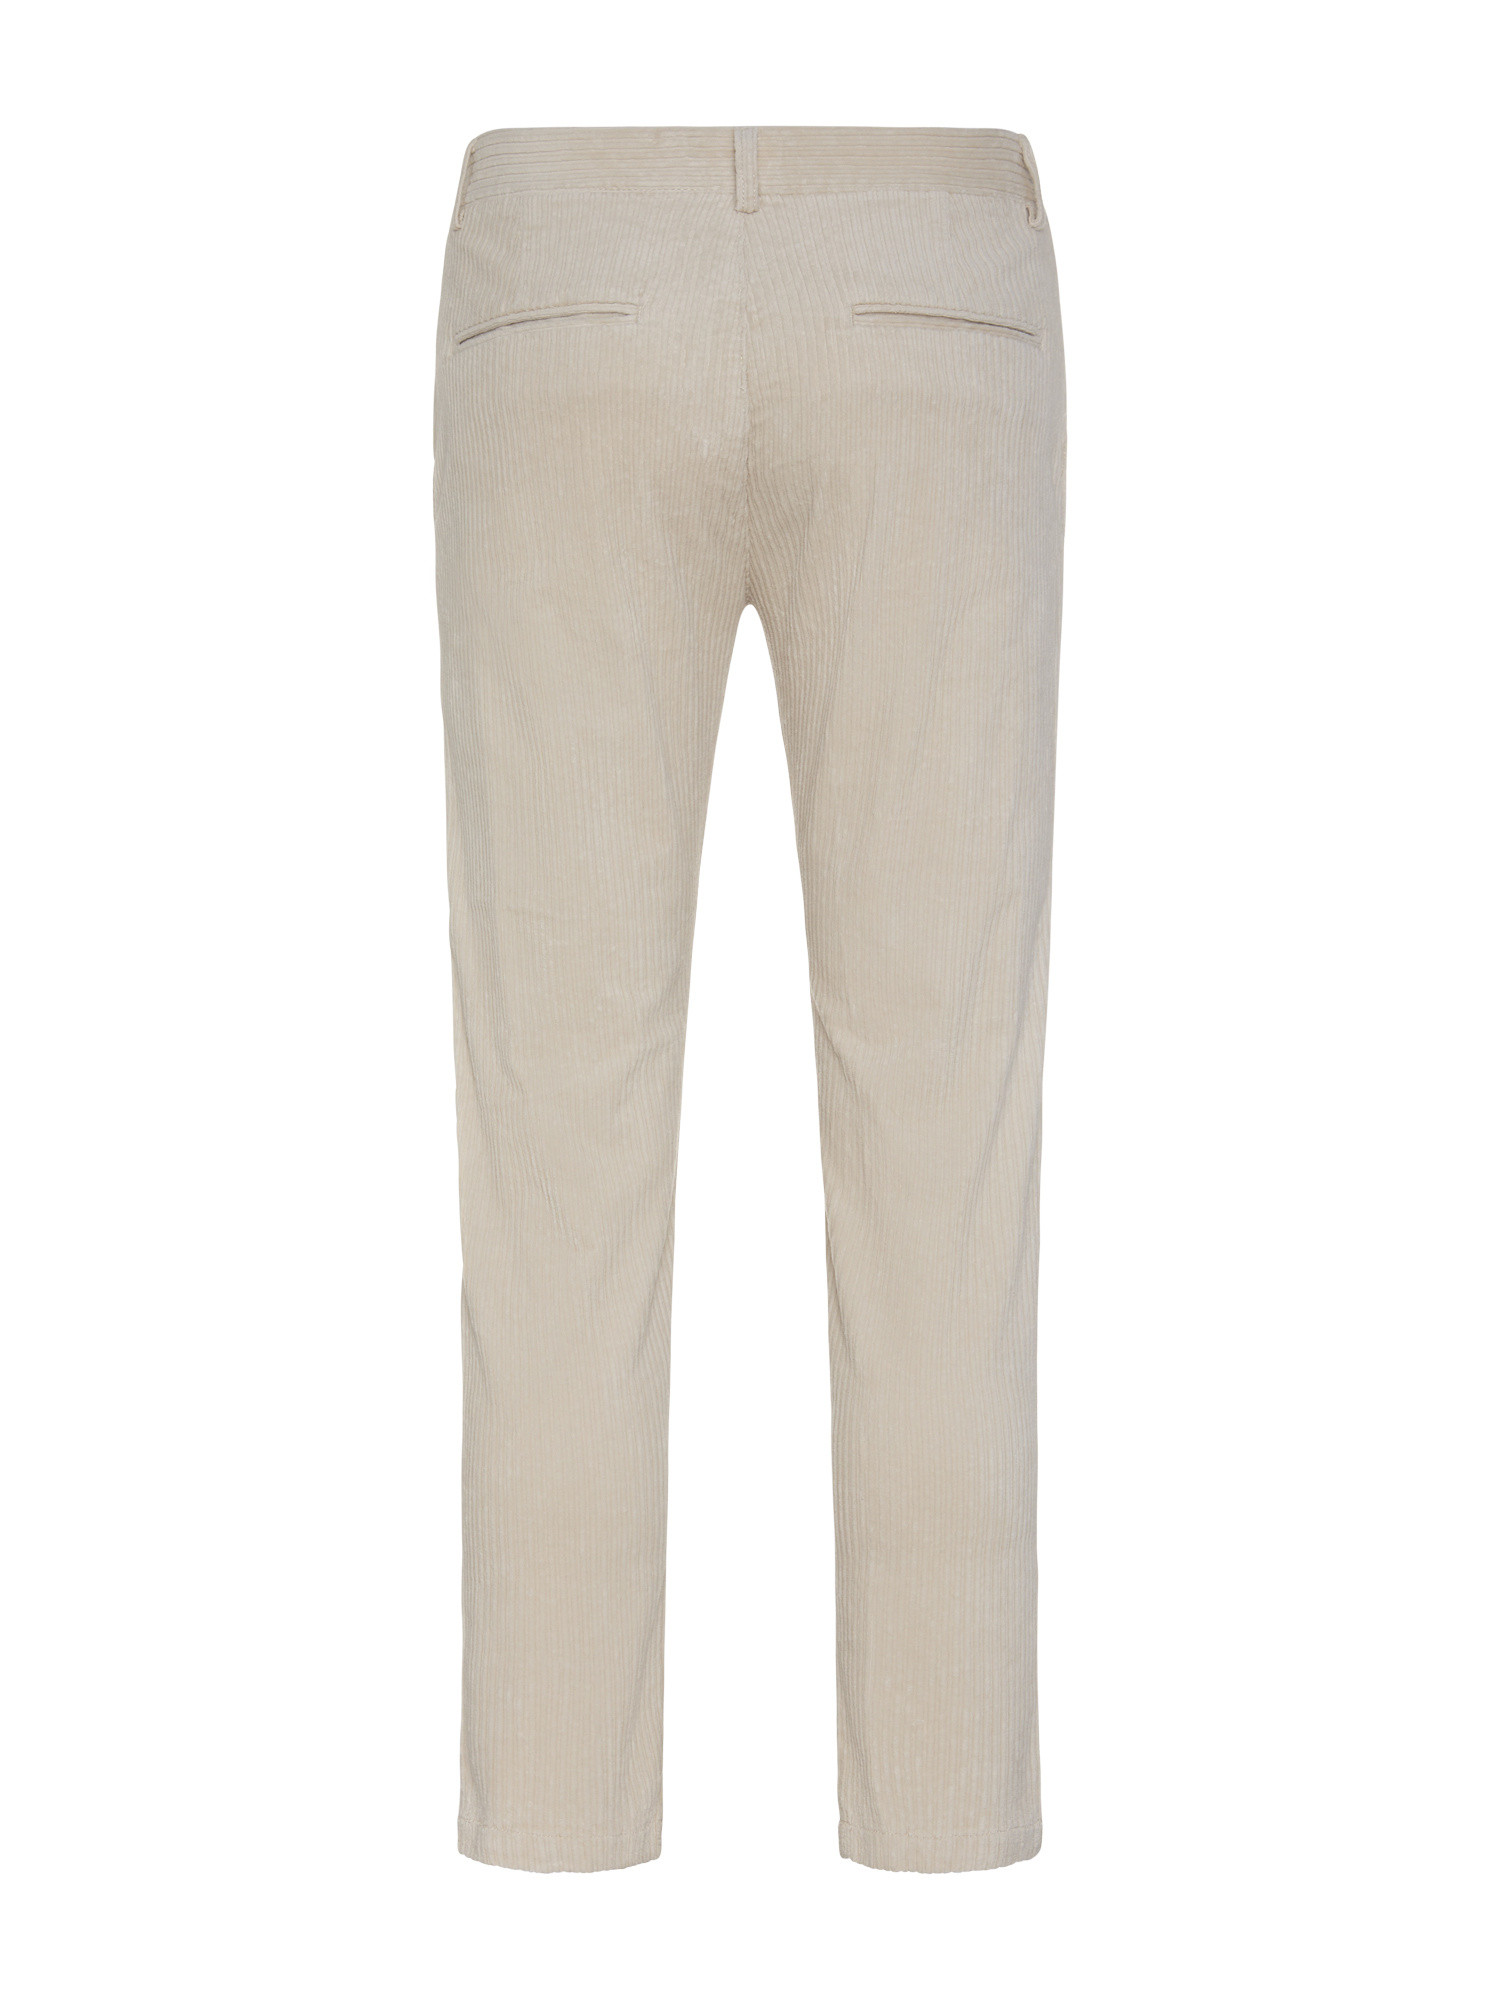 JCT - Corduroy chino trousers, White, large image number 1